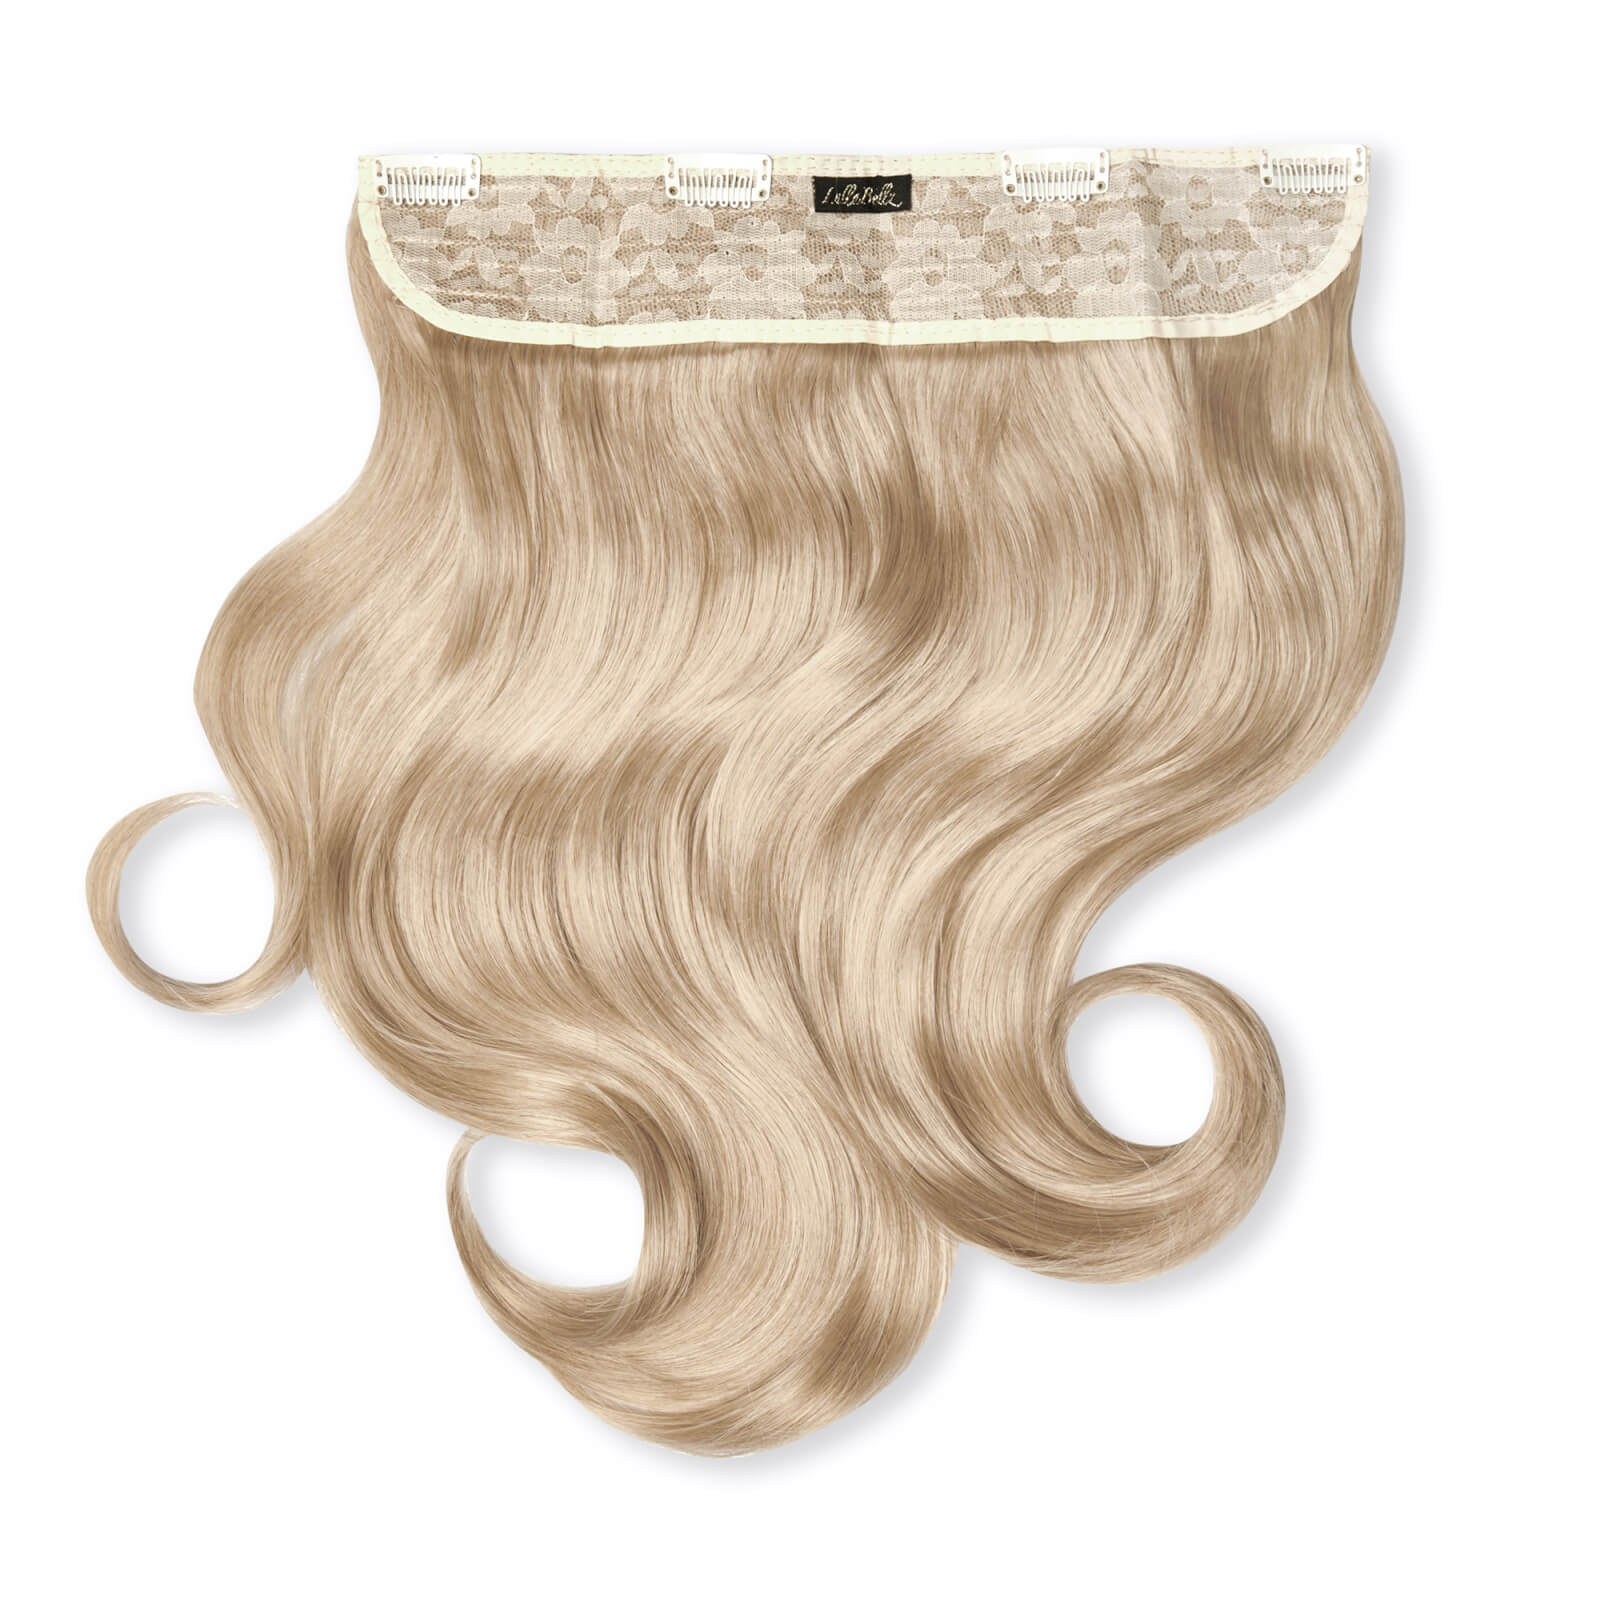 LullaBellz Thick 16 1-Piece Curly Clip in Hair Extensions (Various Colours) - California Blonde von Lullabellz